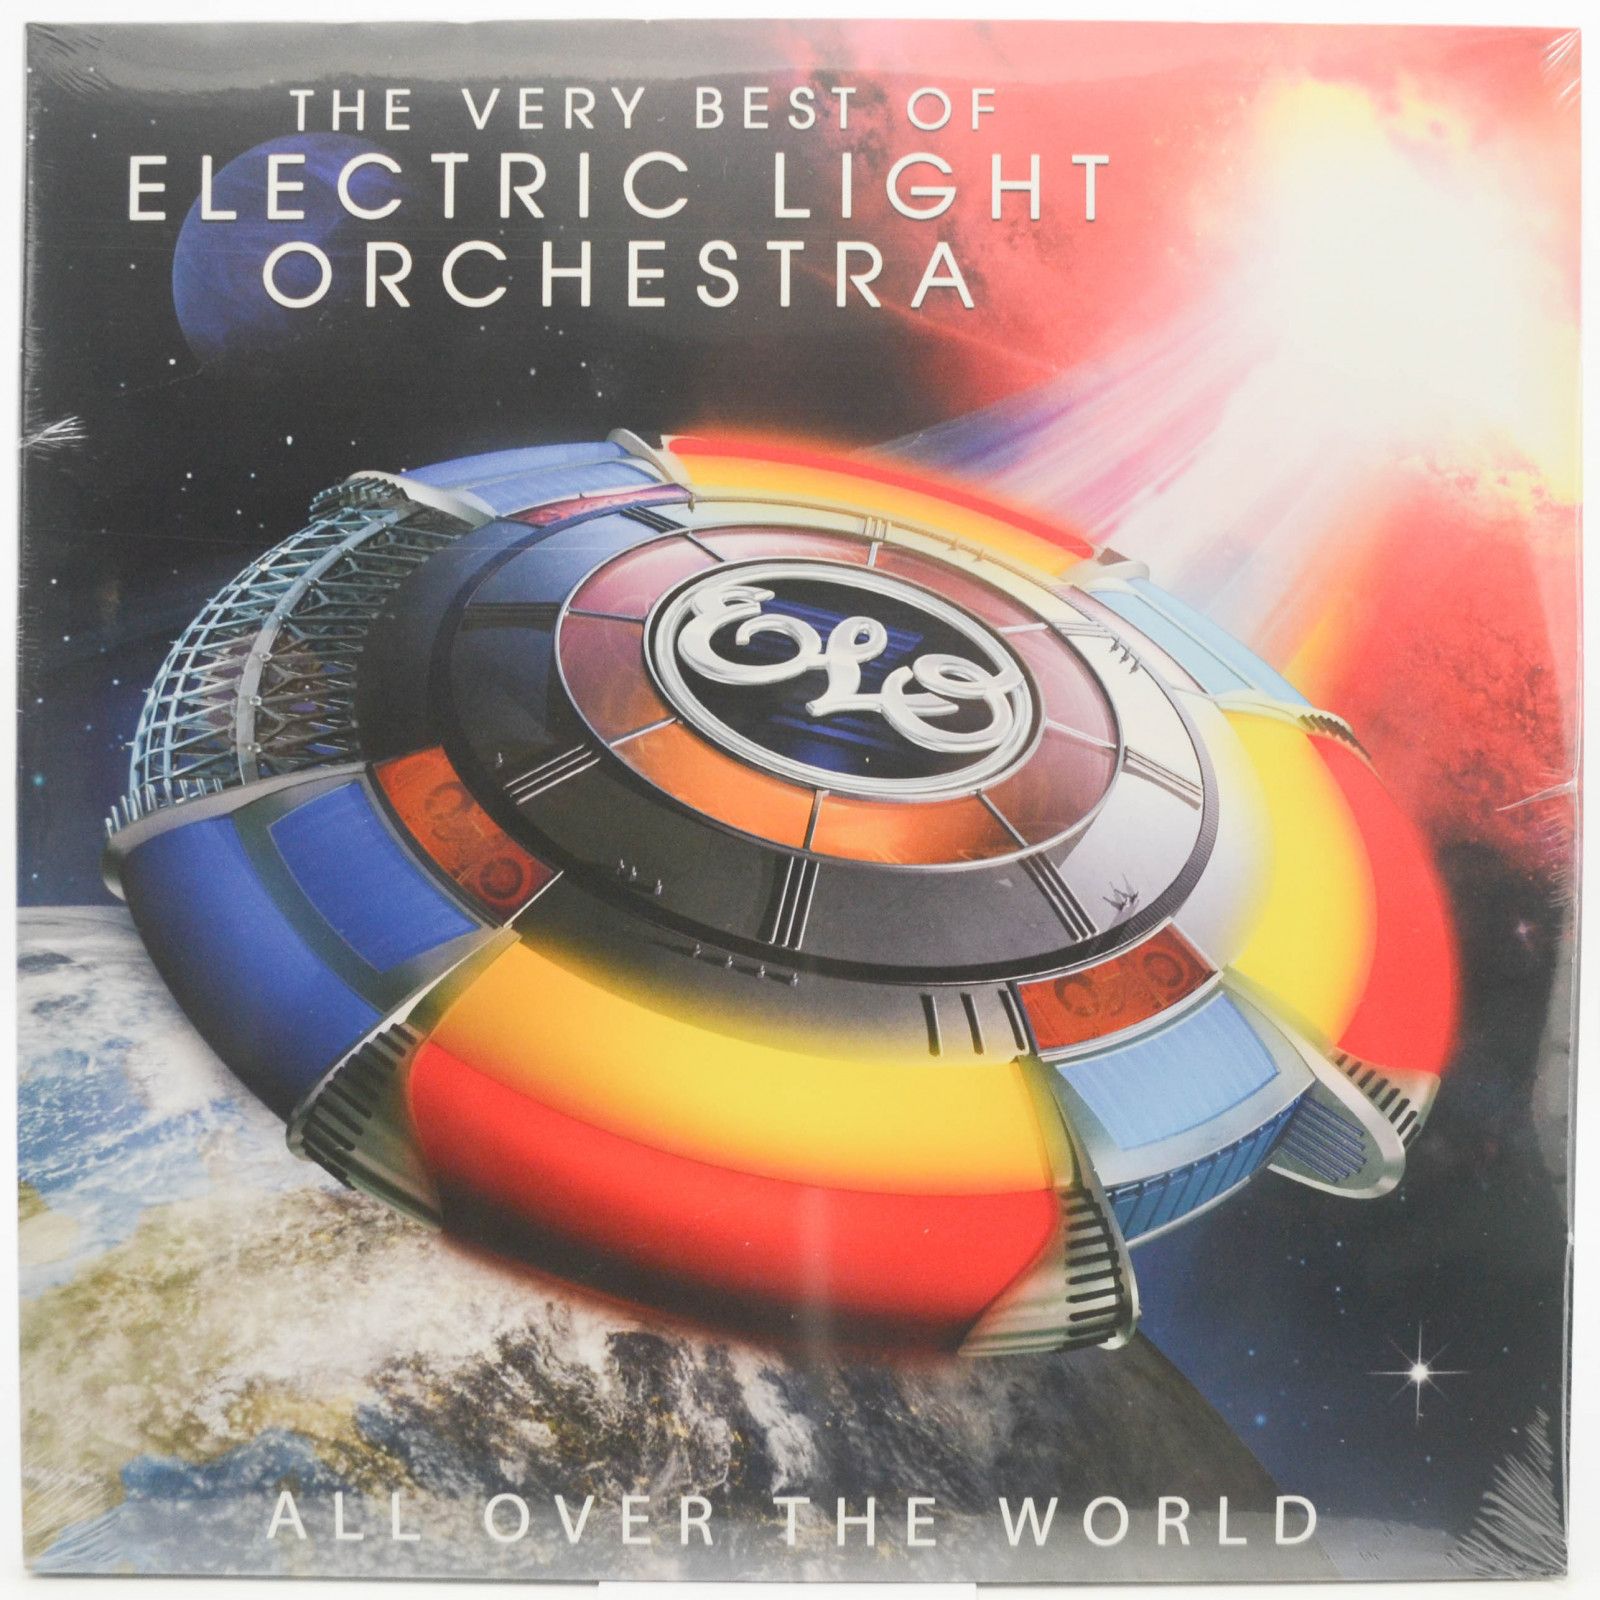 Electric Light Orchestra — All Over The World - The Very Best Of (2LP), 2005